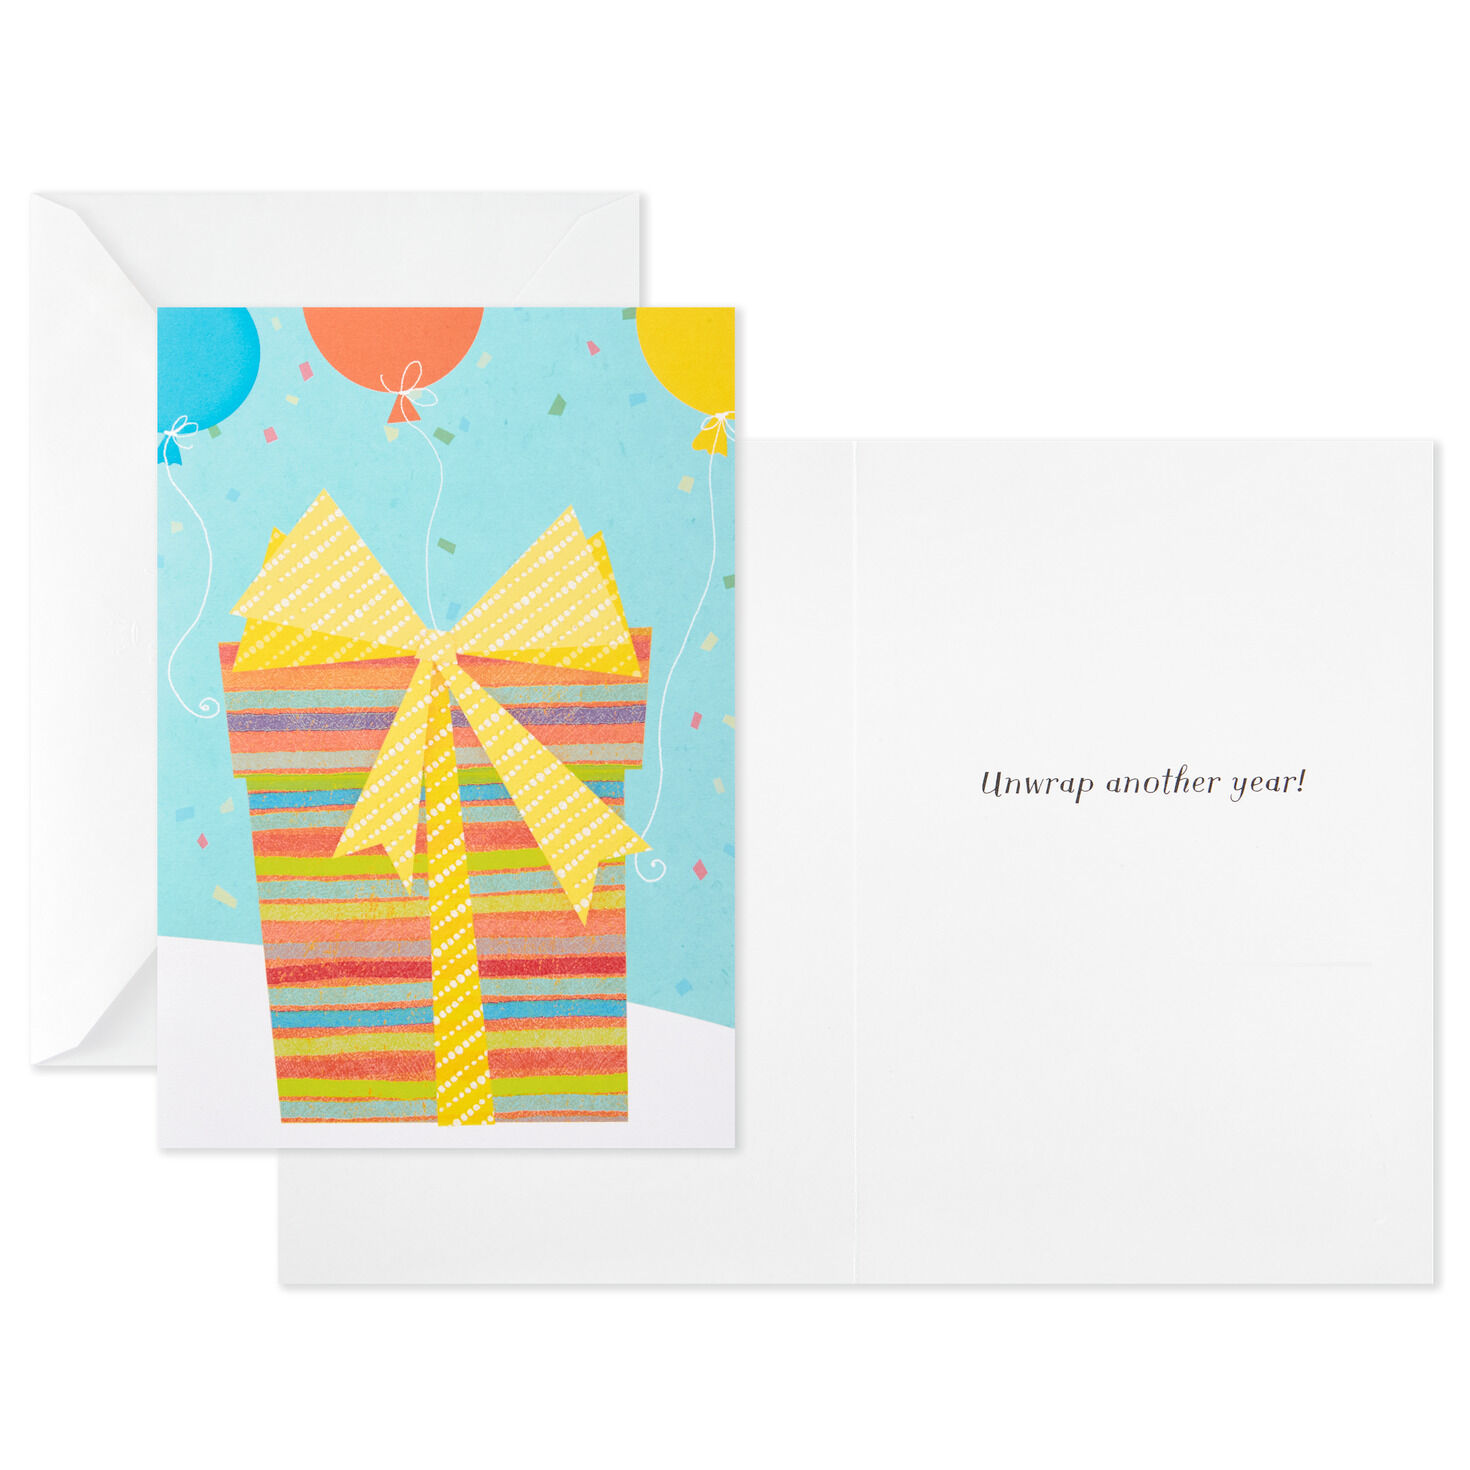 Colorful Assorted Birthday Cards, Pack of 12 for only USD 7.99 | Hallmark